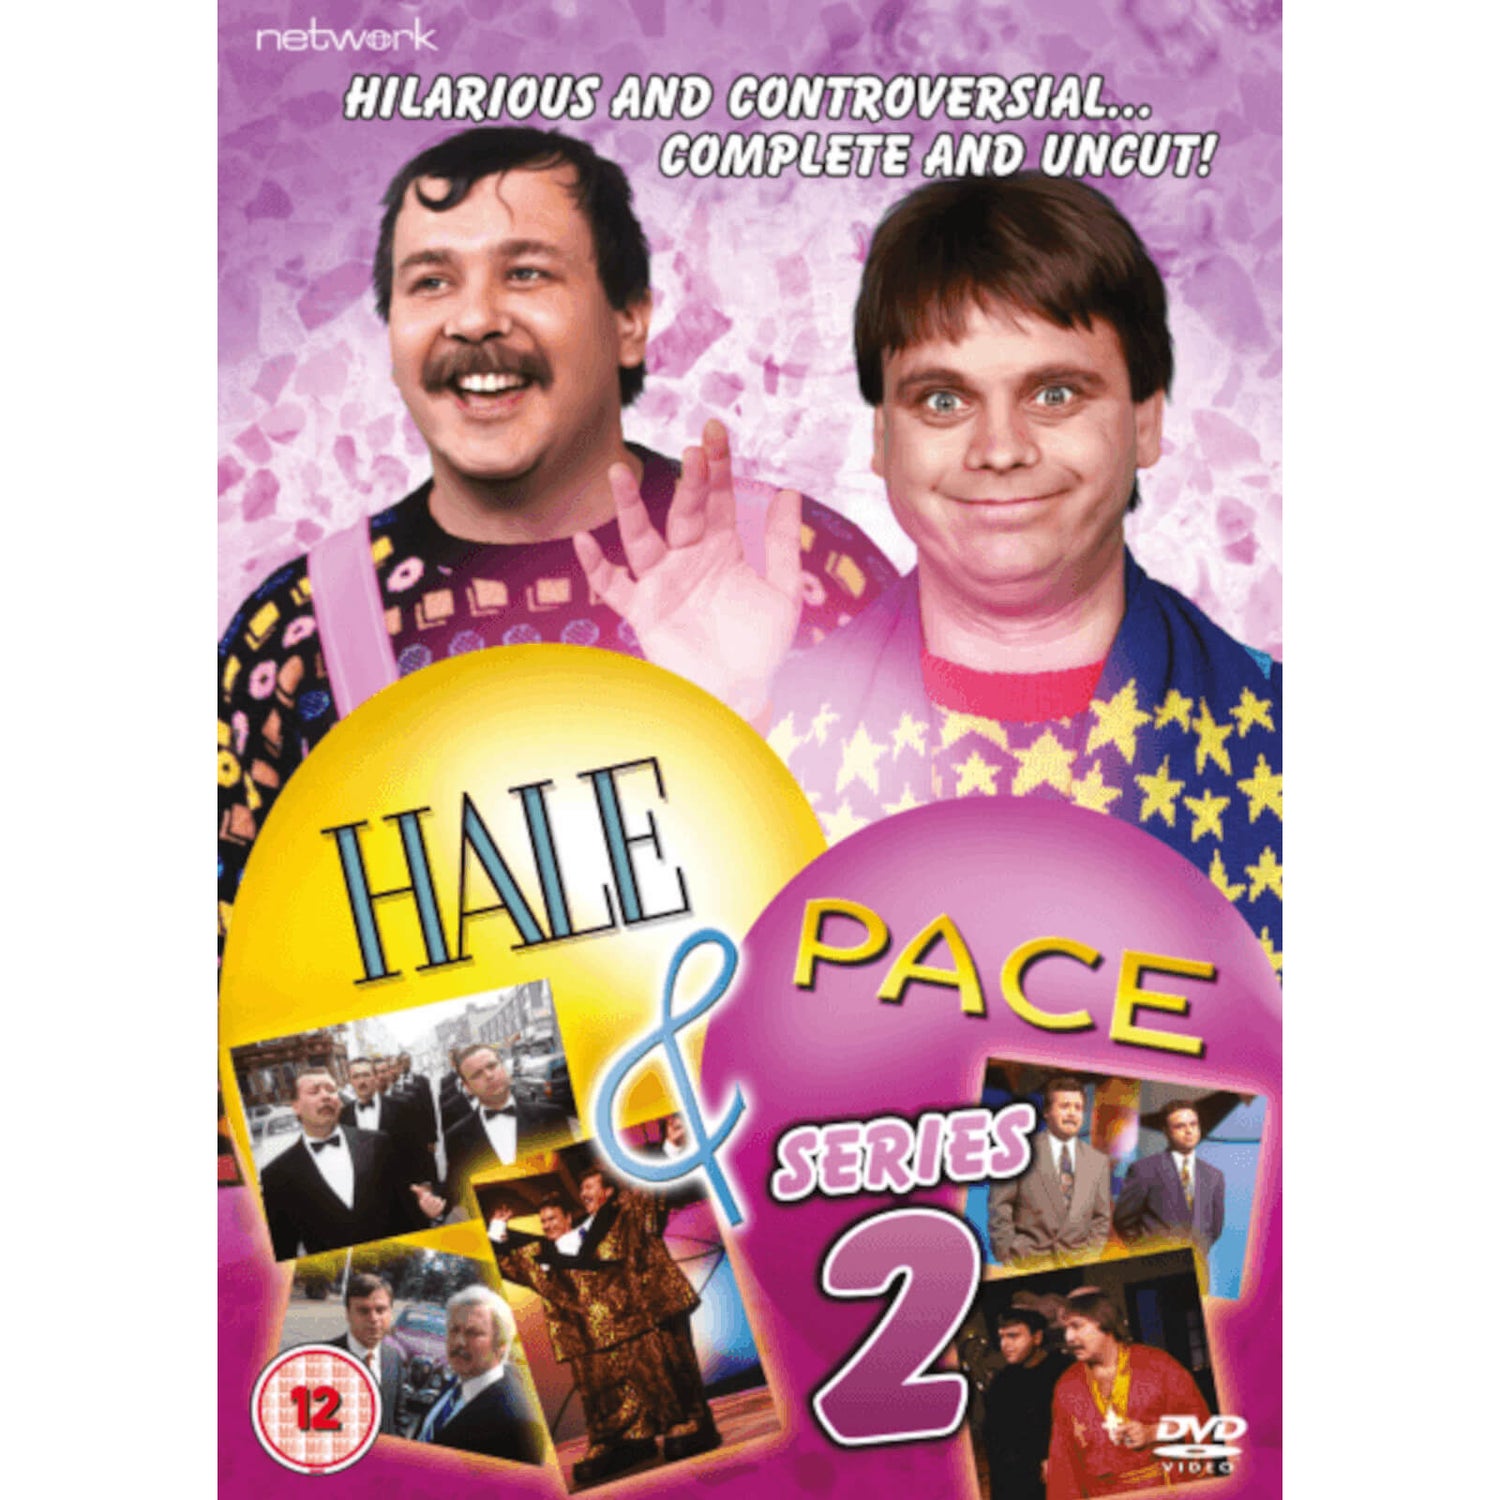 Hale and Pace - Complete Series 2